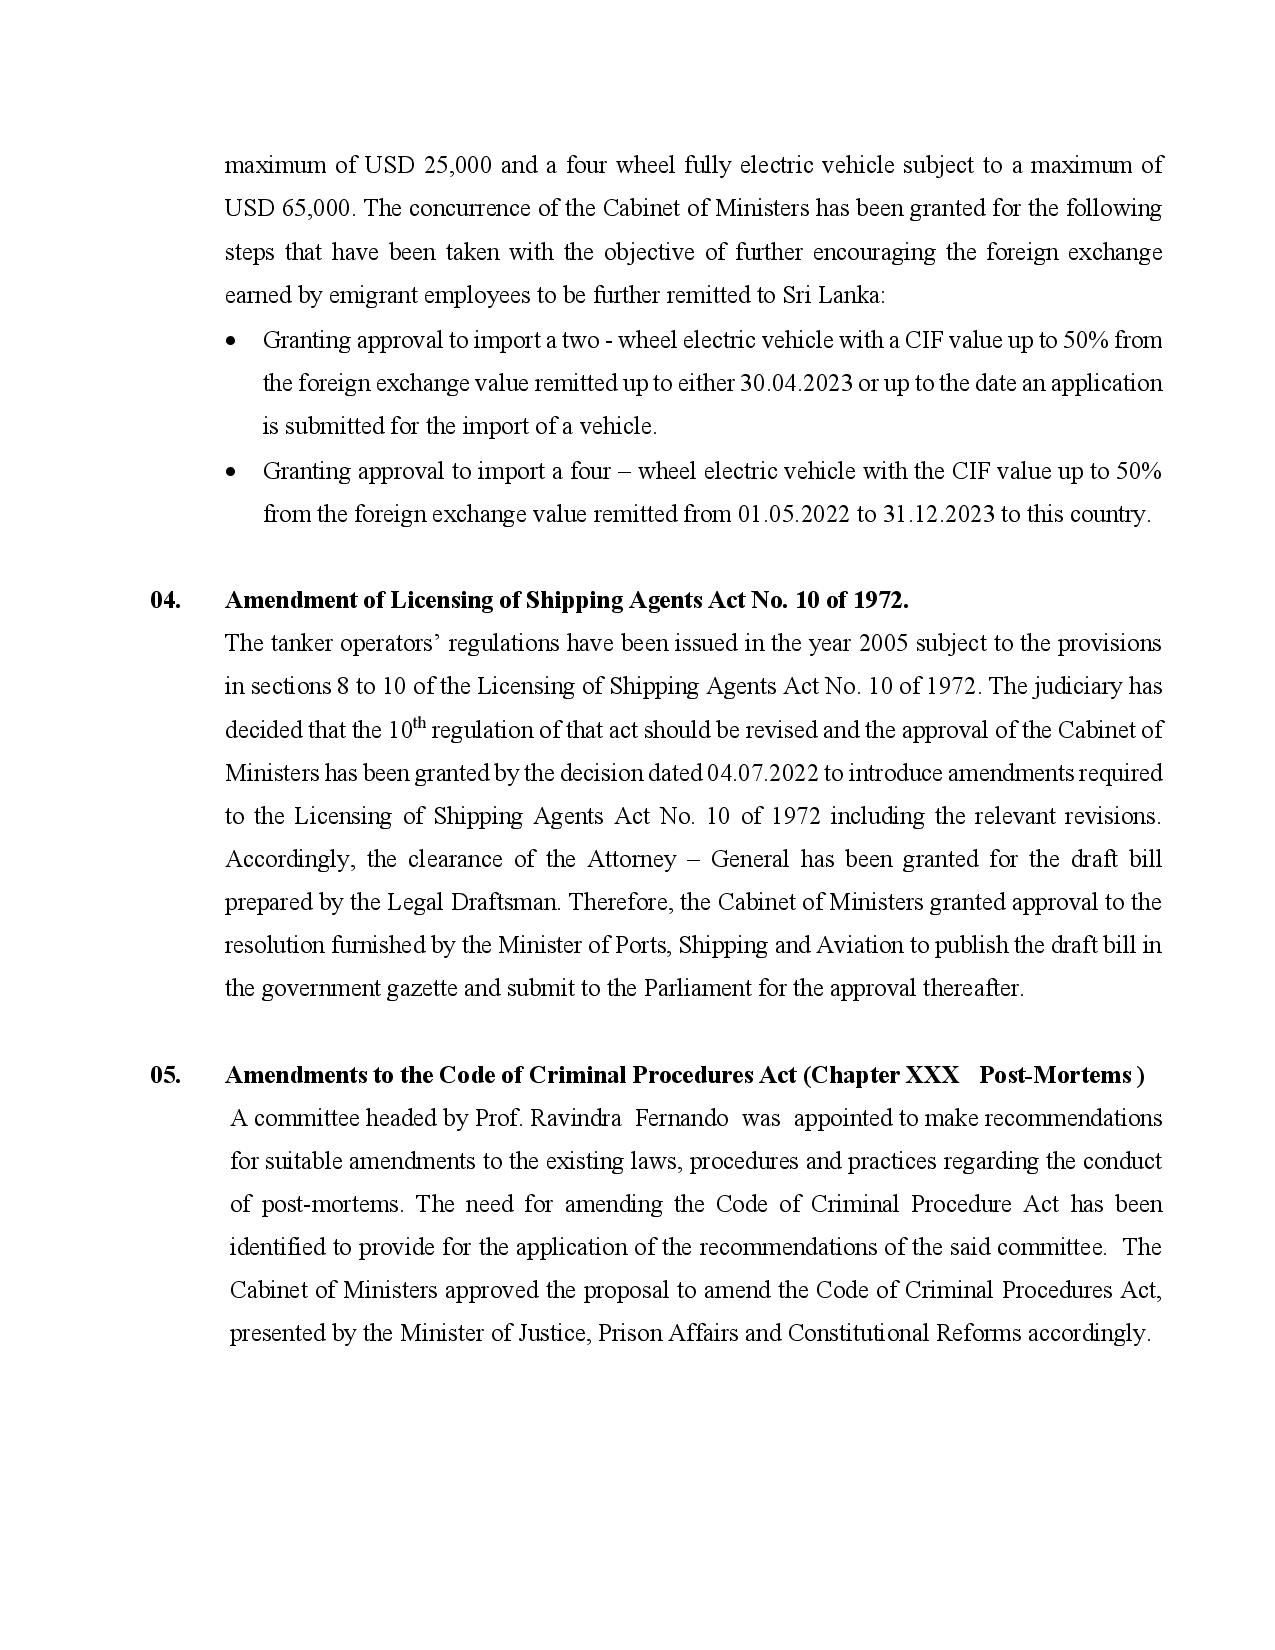 Cabinet Decision on 25.10.2022 English page 002